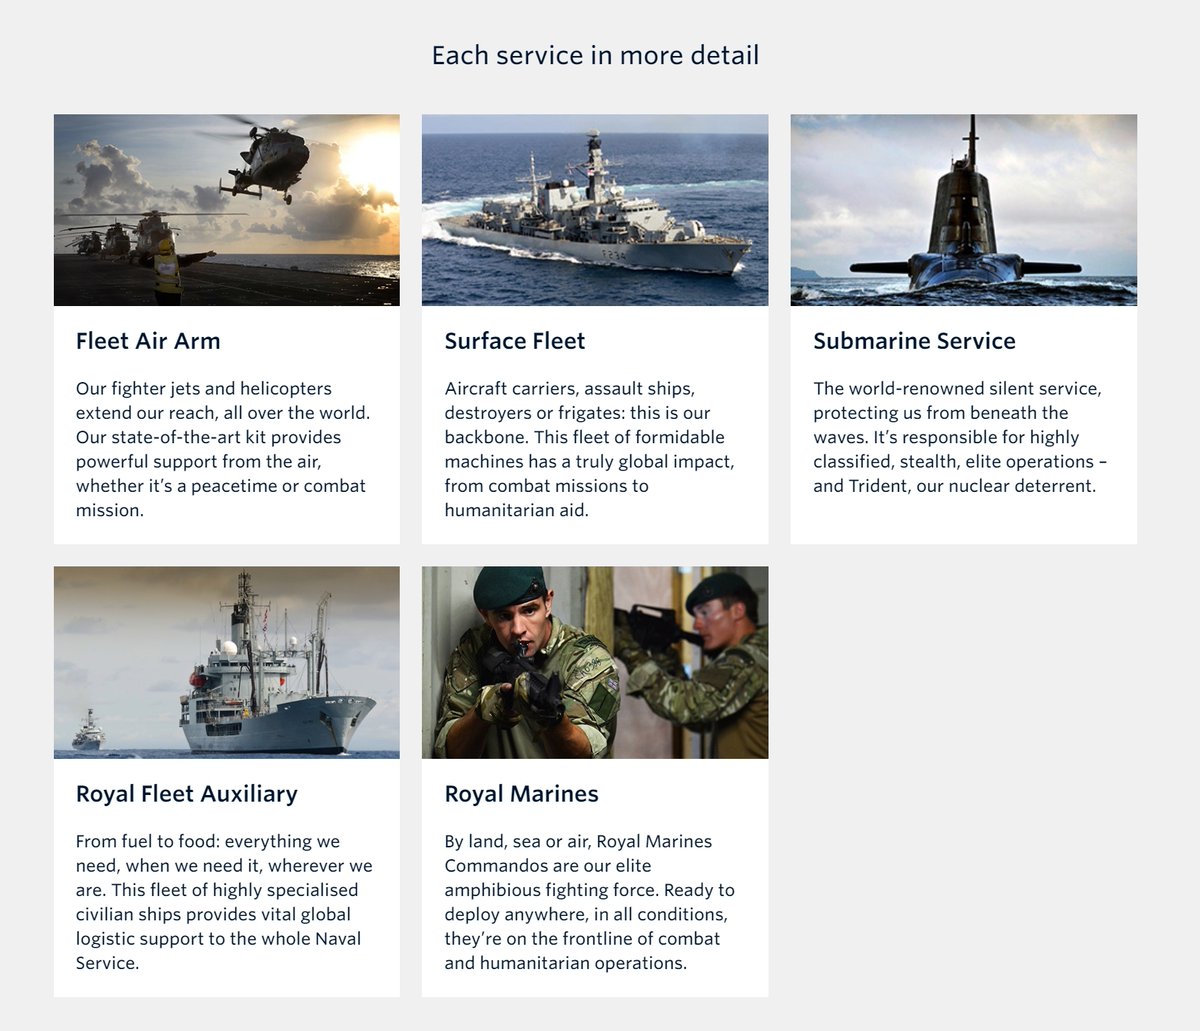 The RFA is the fifth fighting arm of the Royal Navy, crewed almost entirely by civilian personnel which delivers almost unparalleled worldwide logistic and operational support to the Royal Navy and its allies.